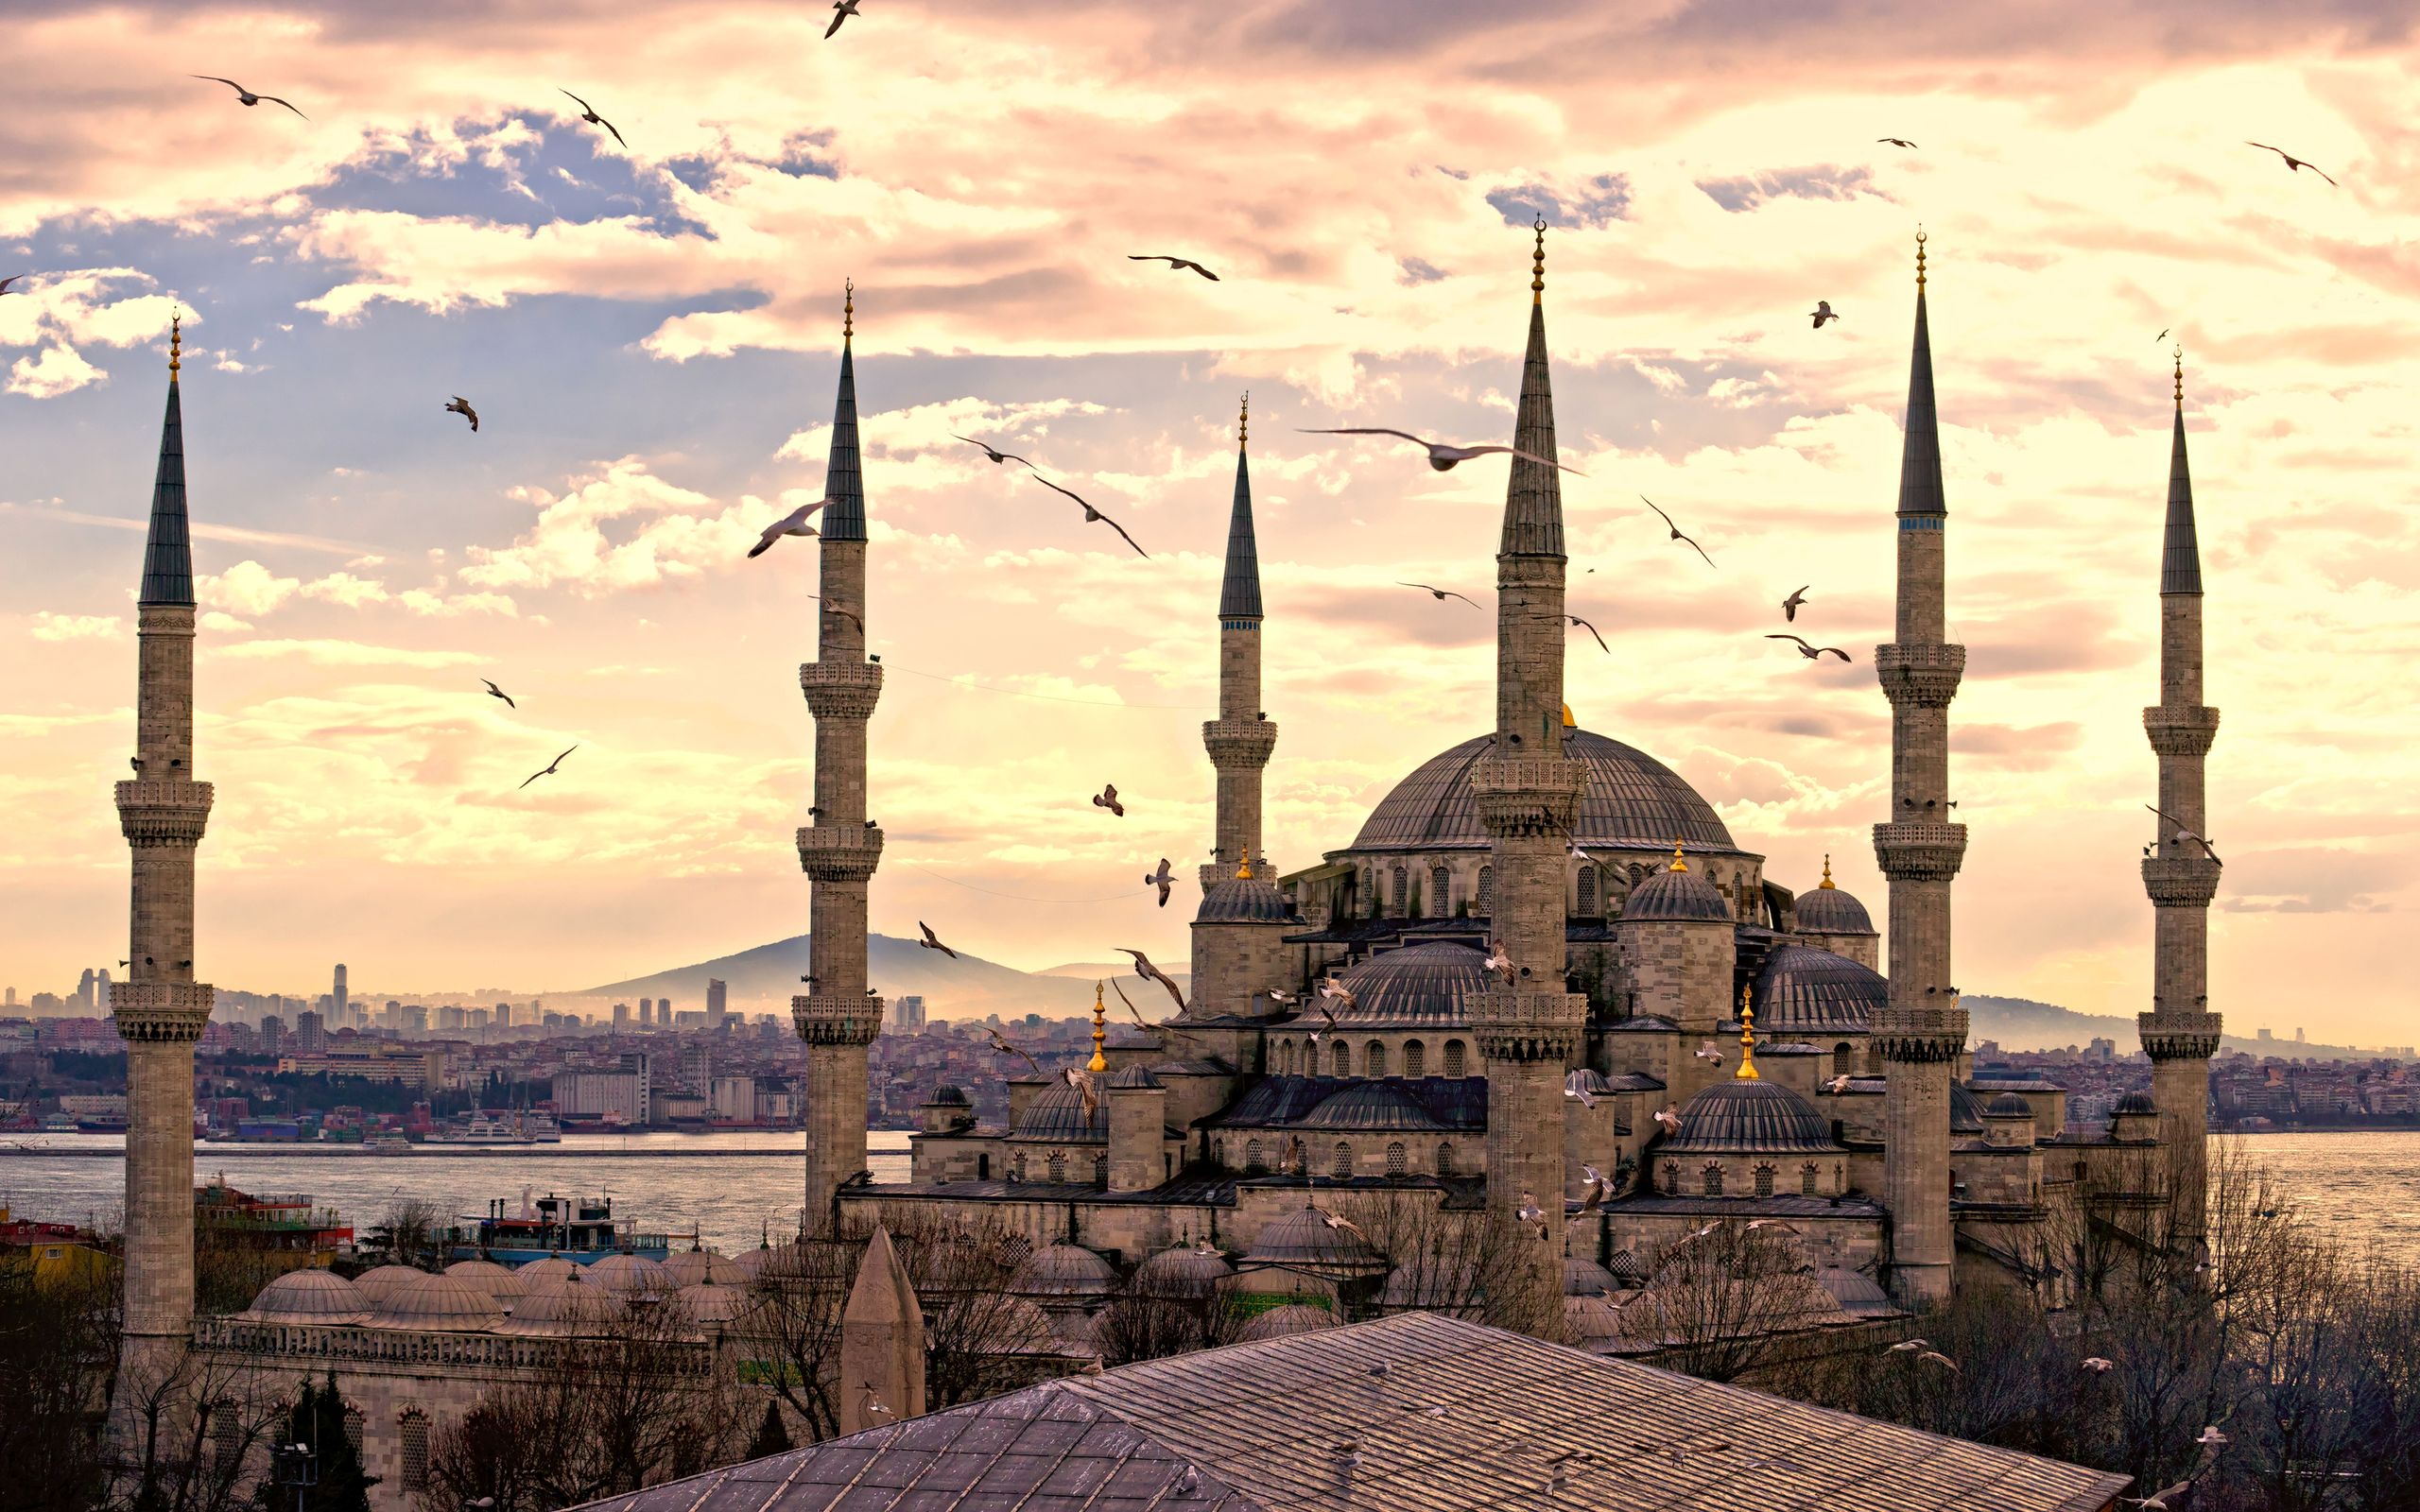 sultan ahmed mosque, religious